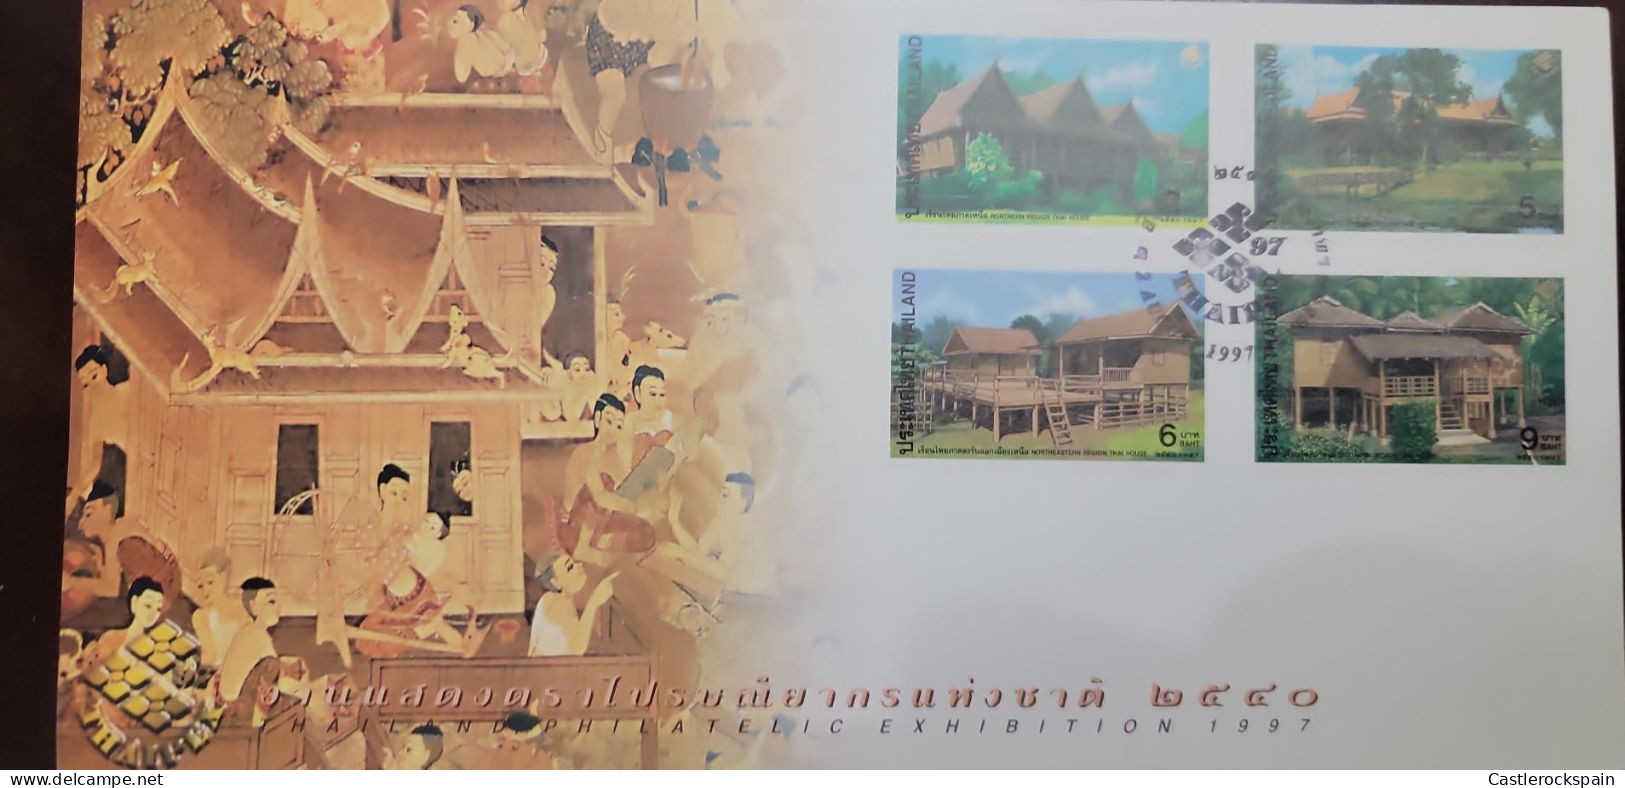 O) 1991 THAILAND, PHILATELIC EXHIBITION, ROYAL THRONE ROOMS IN THE DUSIT PALACE,  - ROYAL HOUSE,  ARCHITECTURE, FDC XF - Thailand